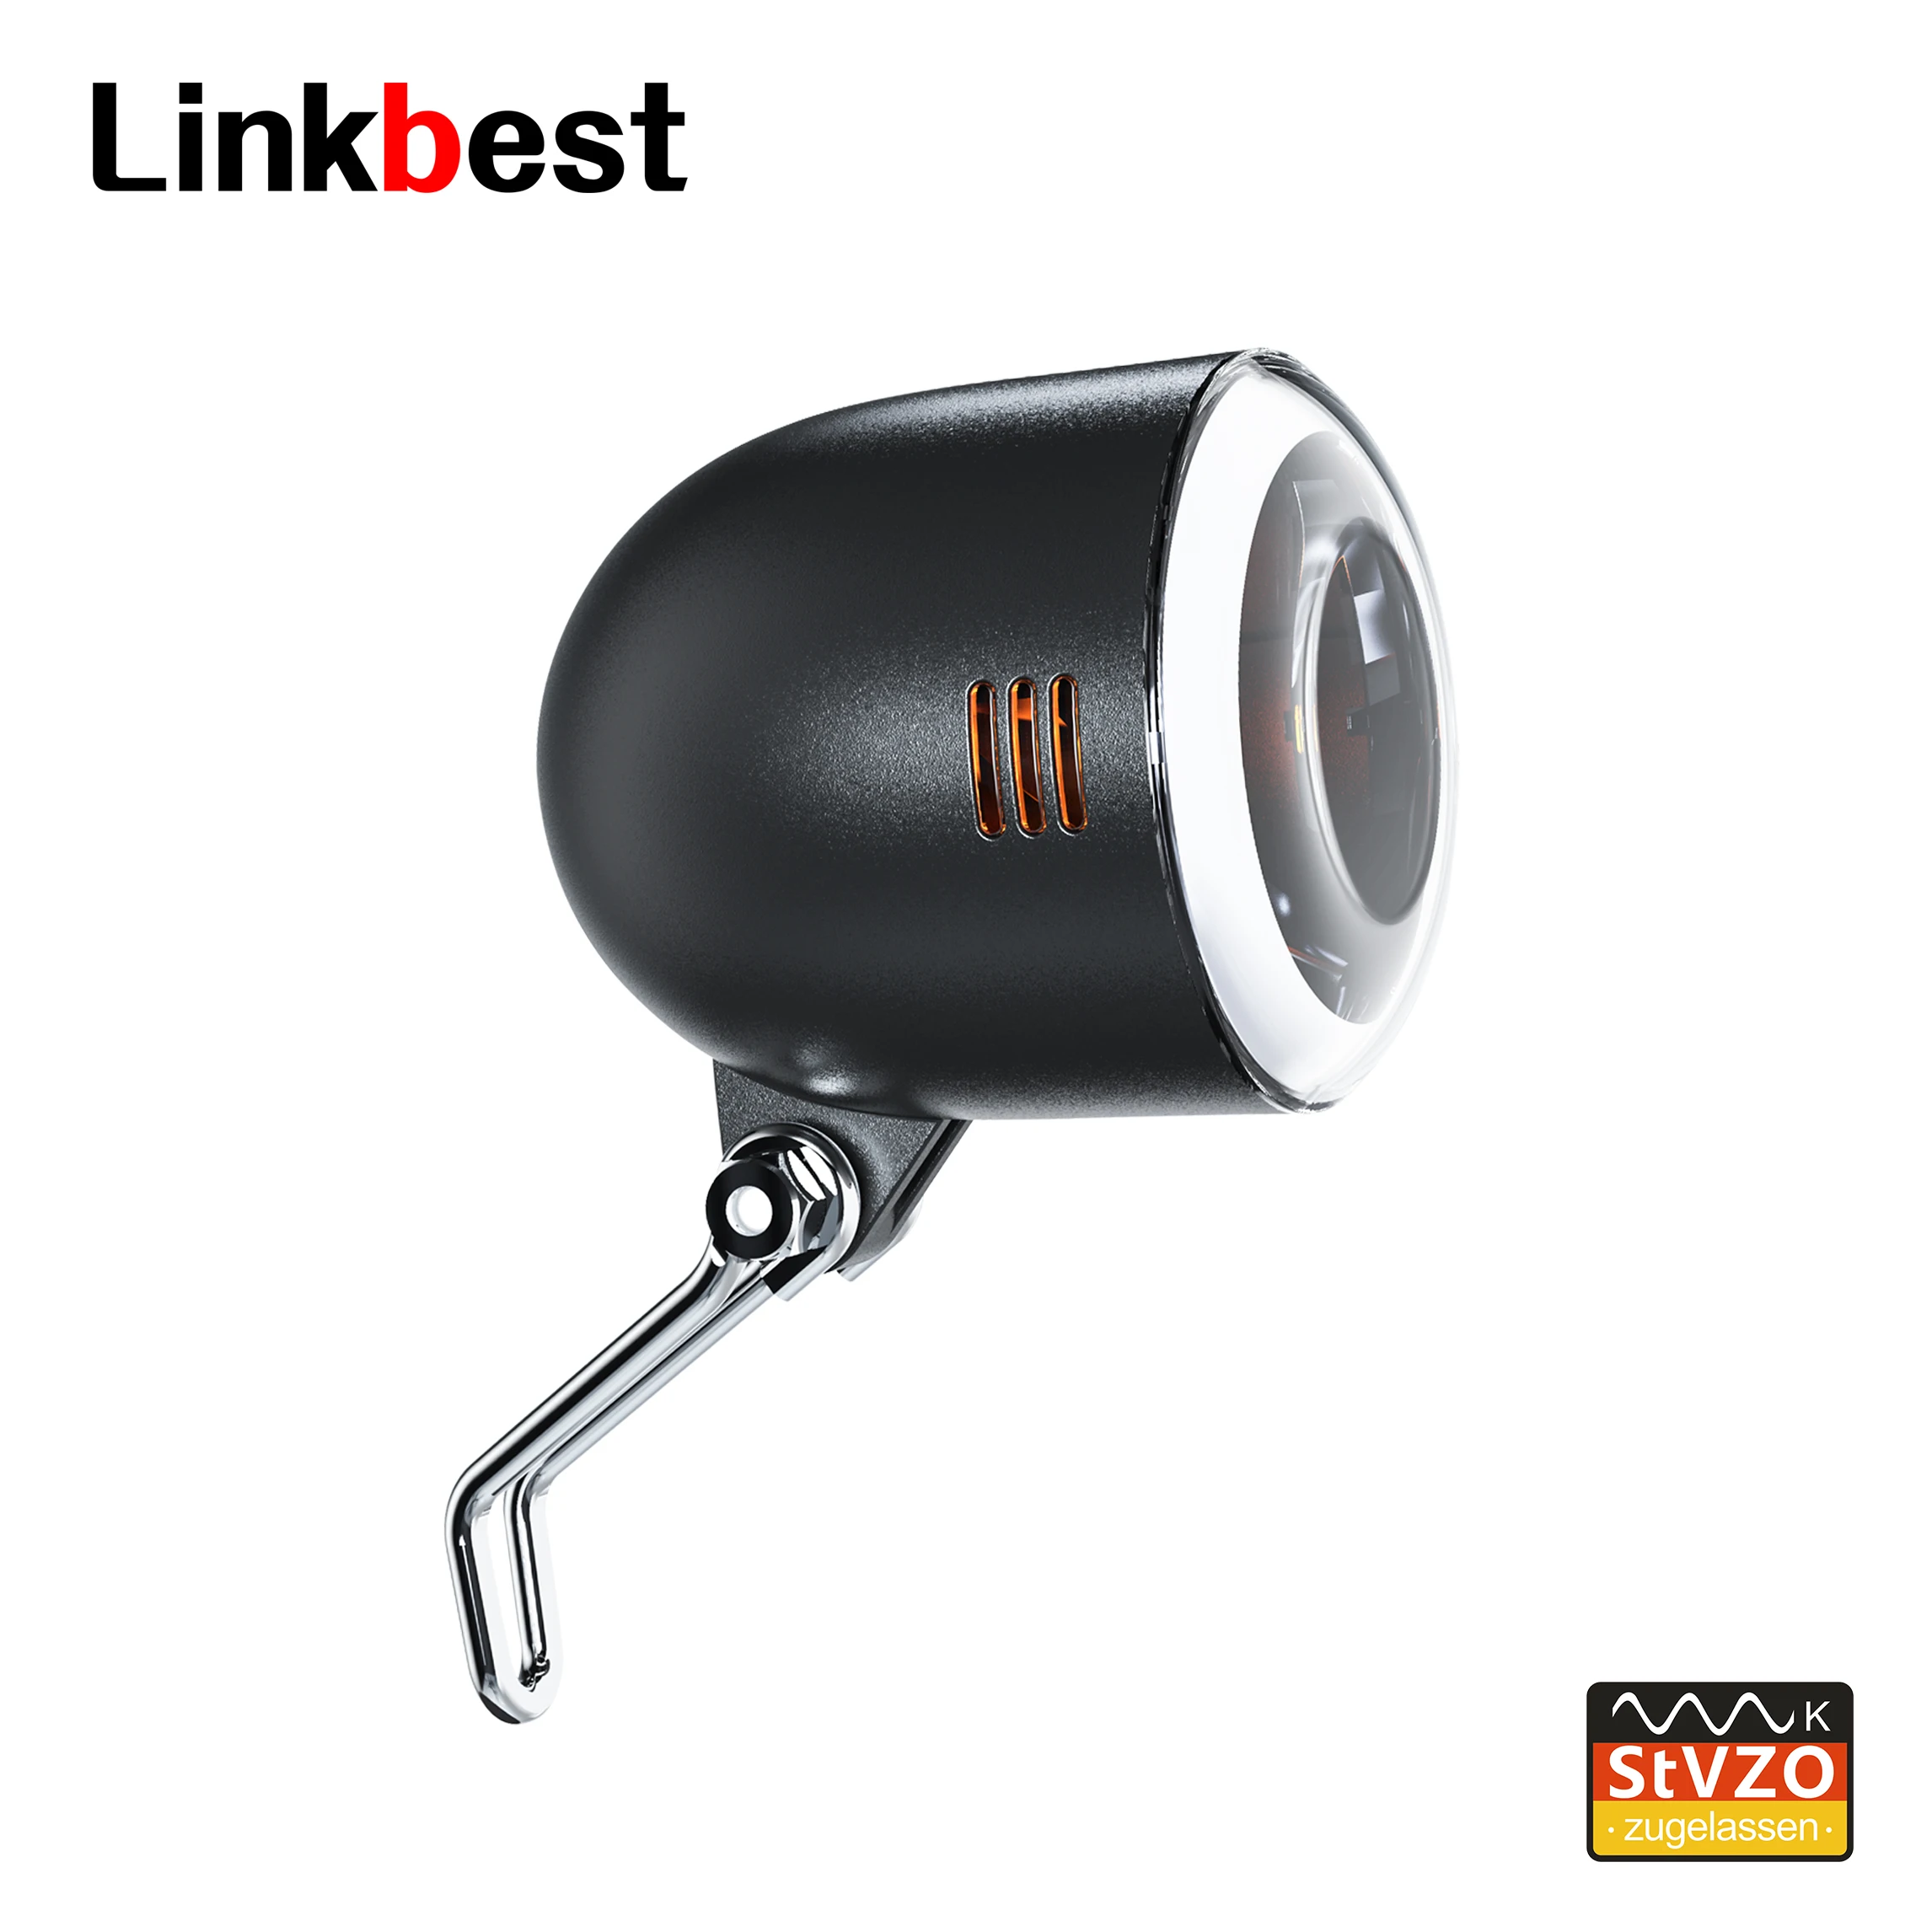 Linkbest Headlight LED Bicycle Light StVZO Approved Cree Led 70 Lux Near Range - £21.71 GBP